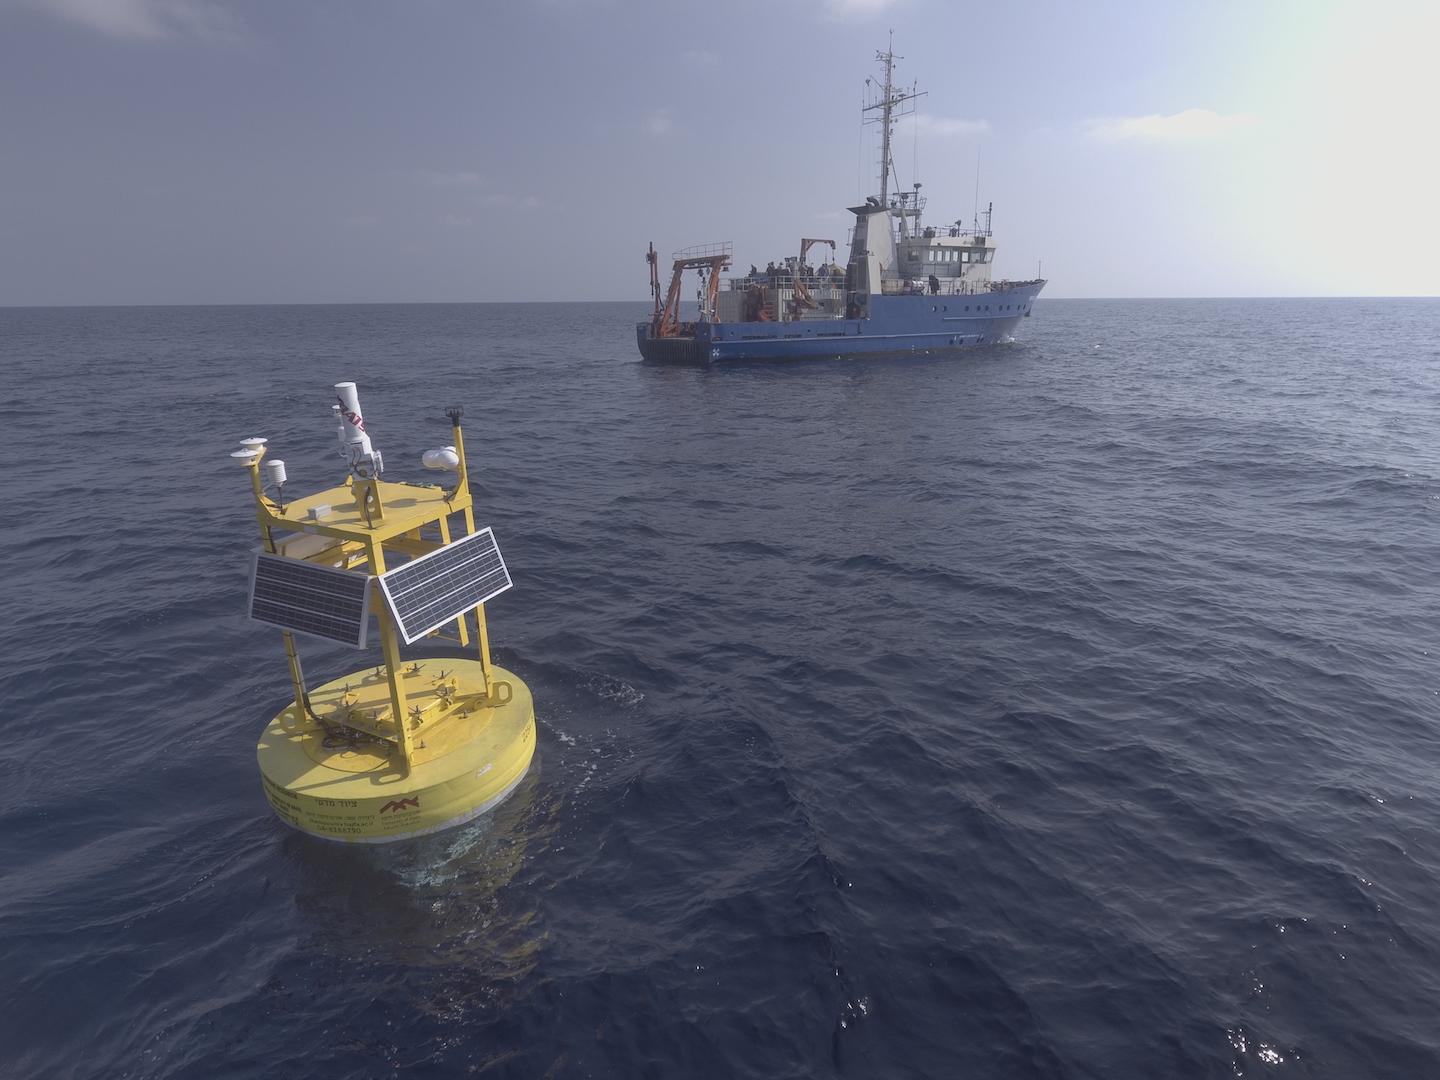 Deployment of shallow-water mooring experimentation site